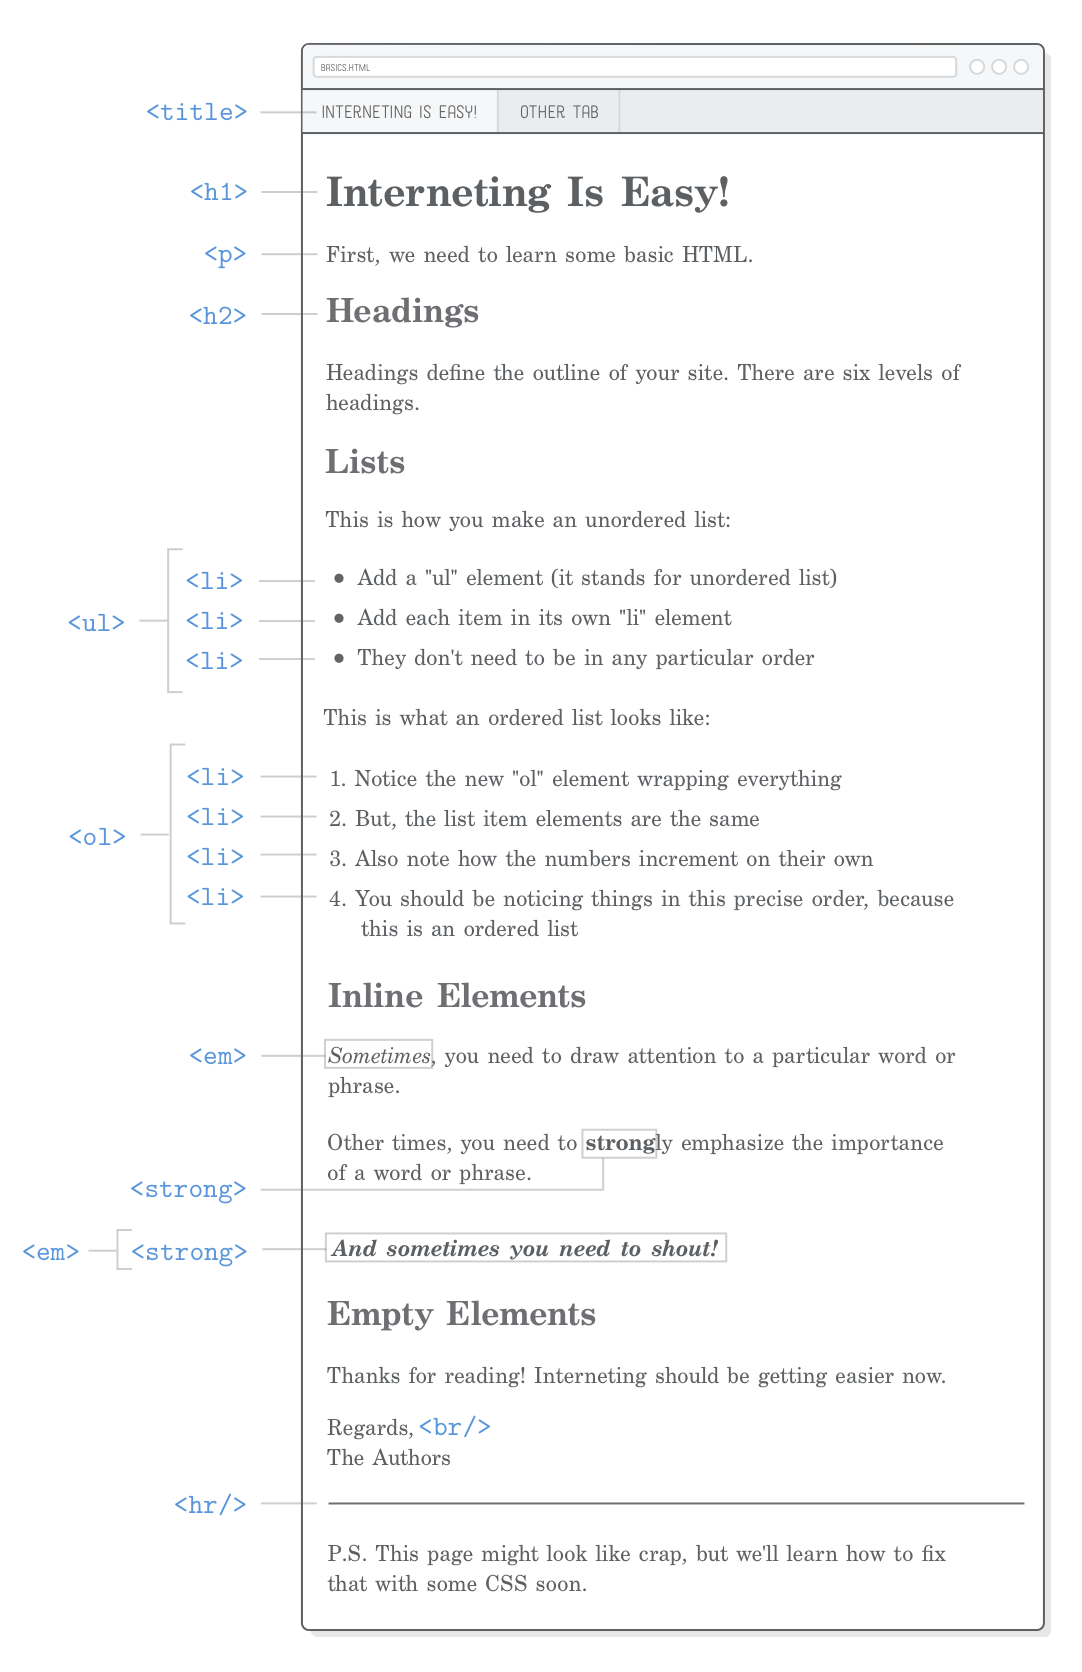 Web page showing <title>, <p>, <h1>, <ol>, and other basic HTML elements